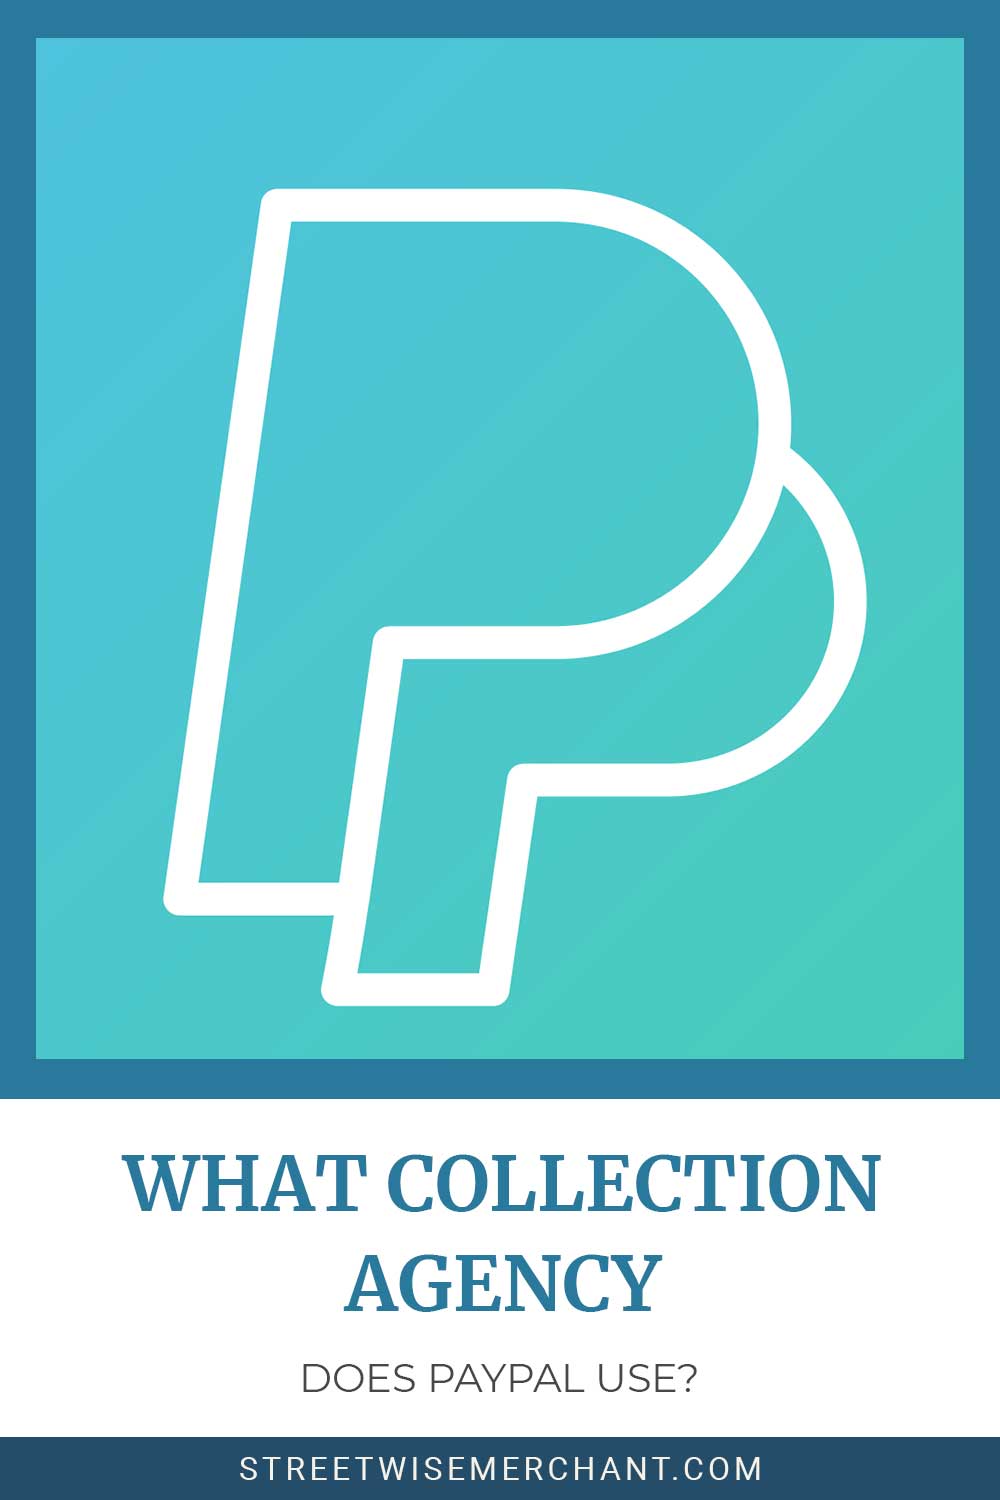 What Collection Agency Does PayPal Use?